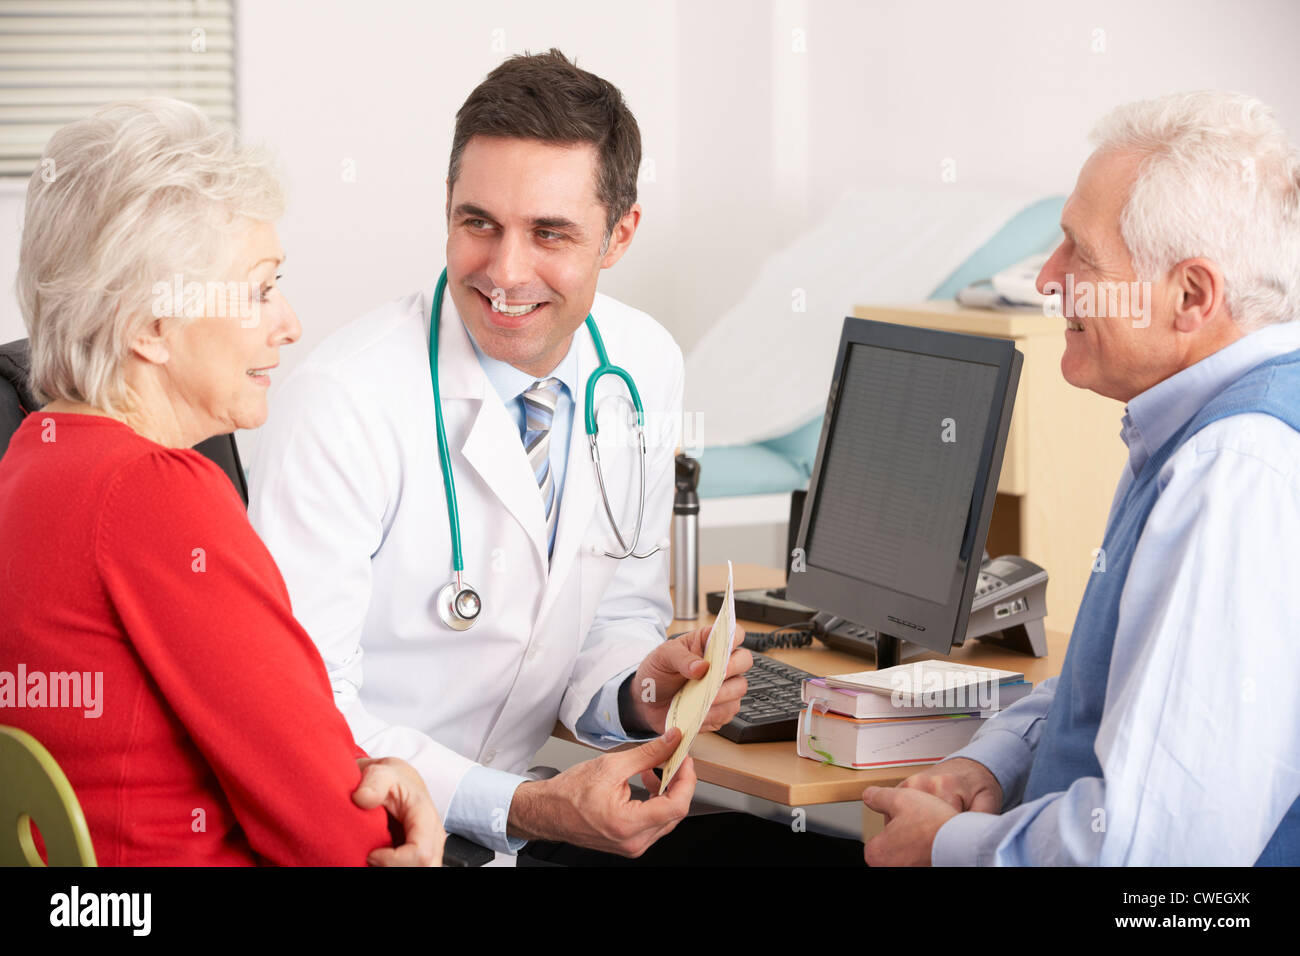 American doctor talking to senior couple in surgery Stock Photo